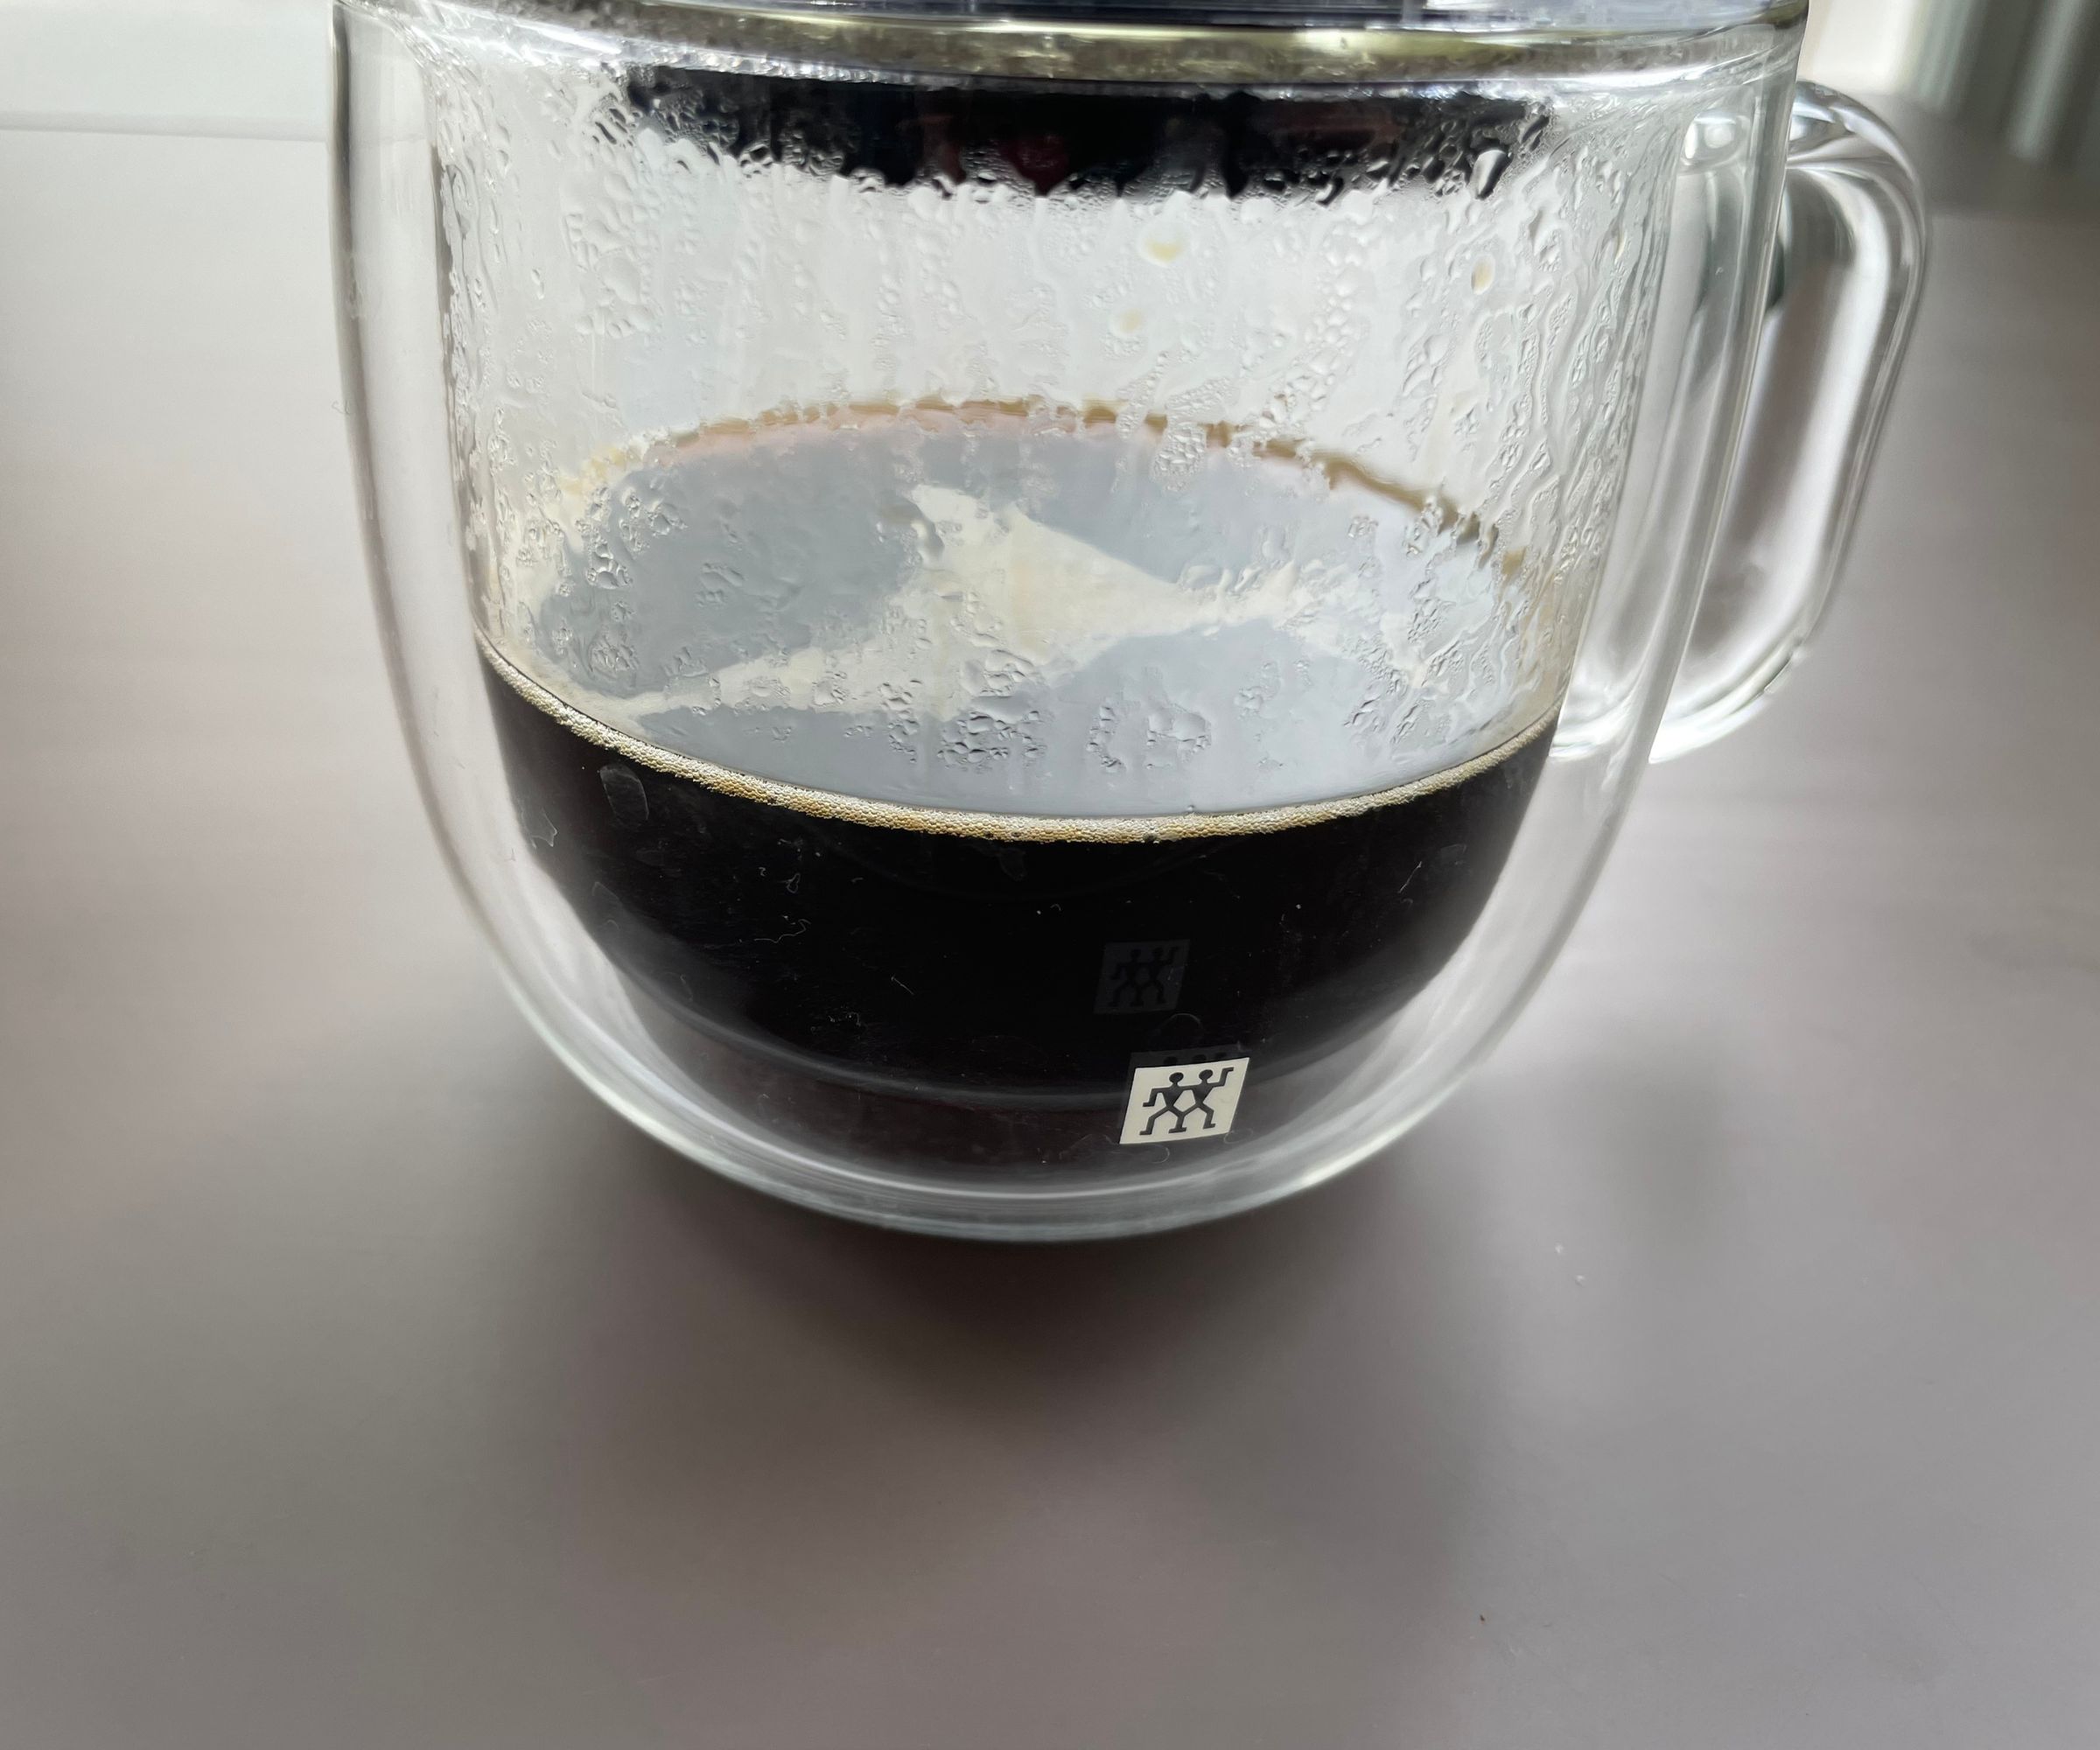 Brewing coffee from the AeroPress into the cup following The Ultimate AeroPress Recipe